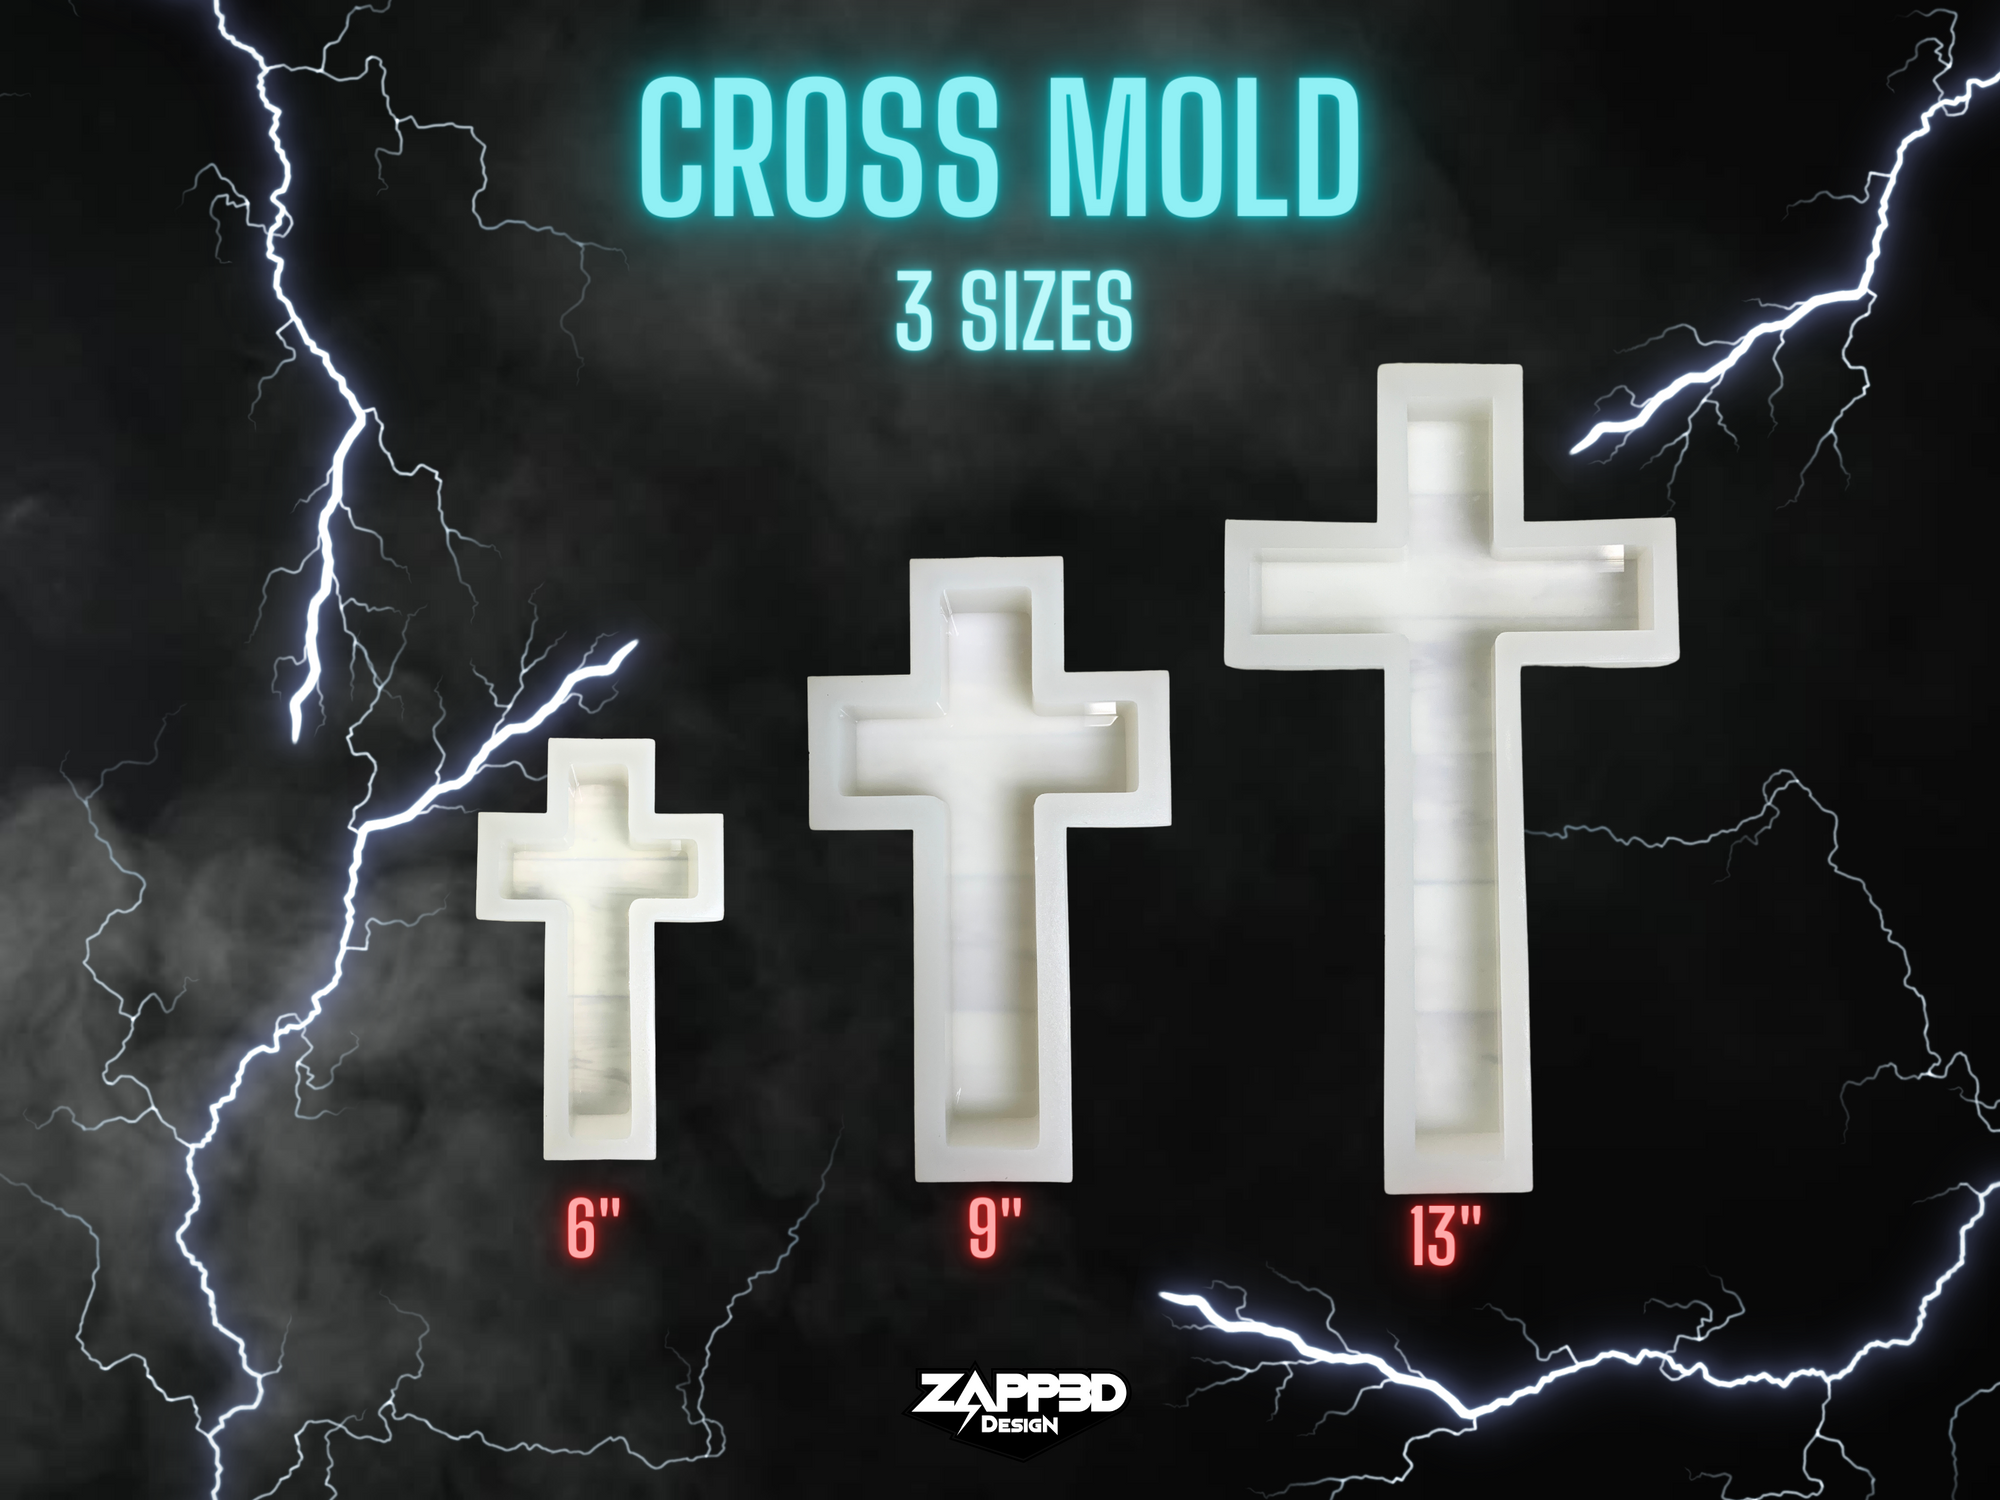 Cross Resin Mold | 3 Sizes | ULTRA Quality | Cross Mold, Memorial Molds, Flower Preservation Mold, Cross Mold for Resin, Cross Silicone Mold